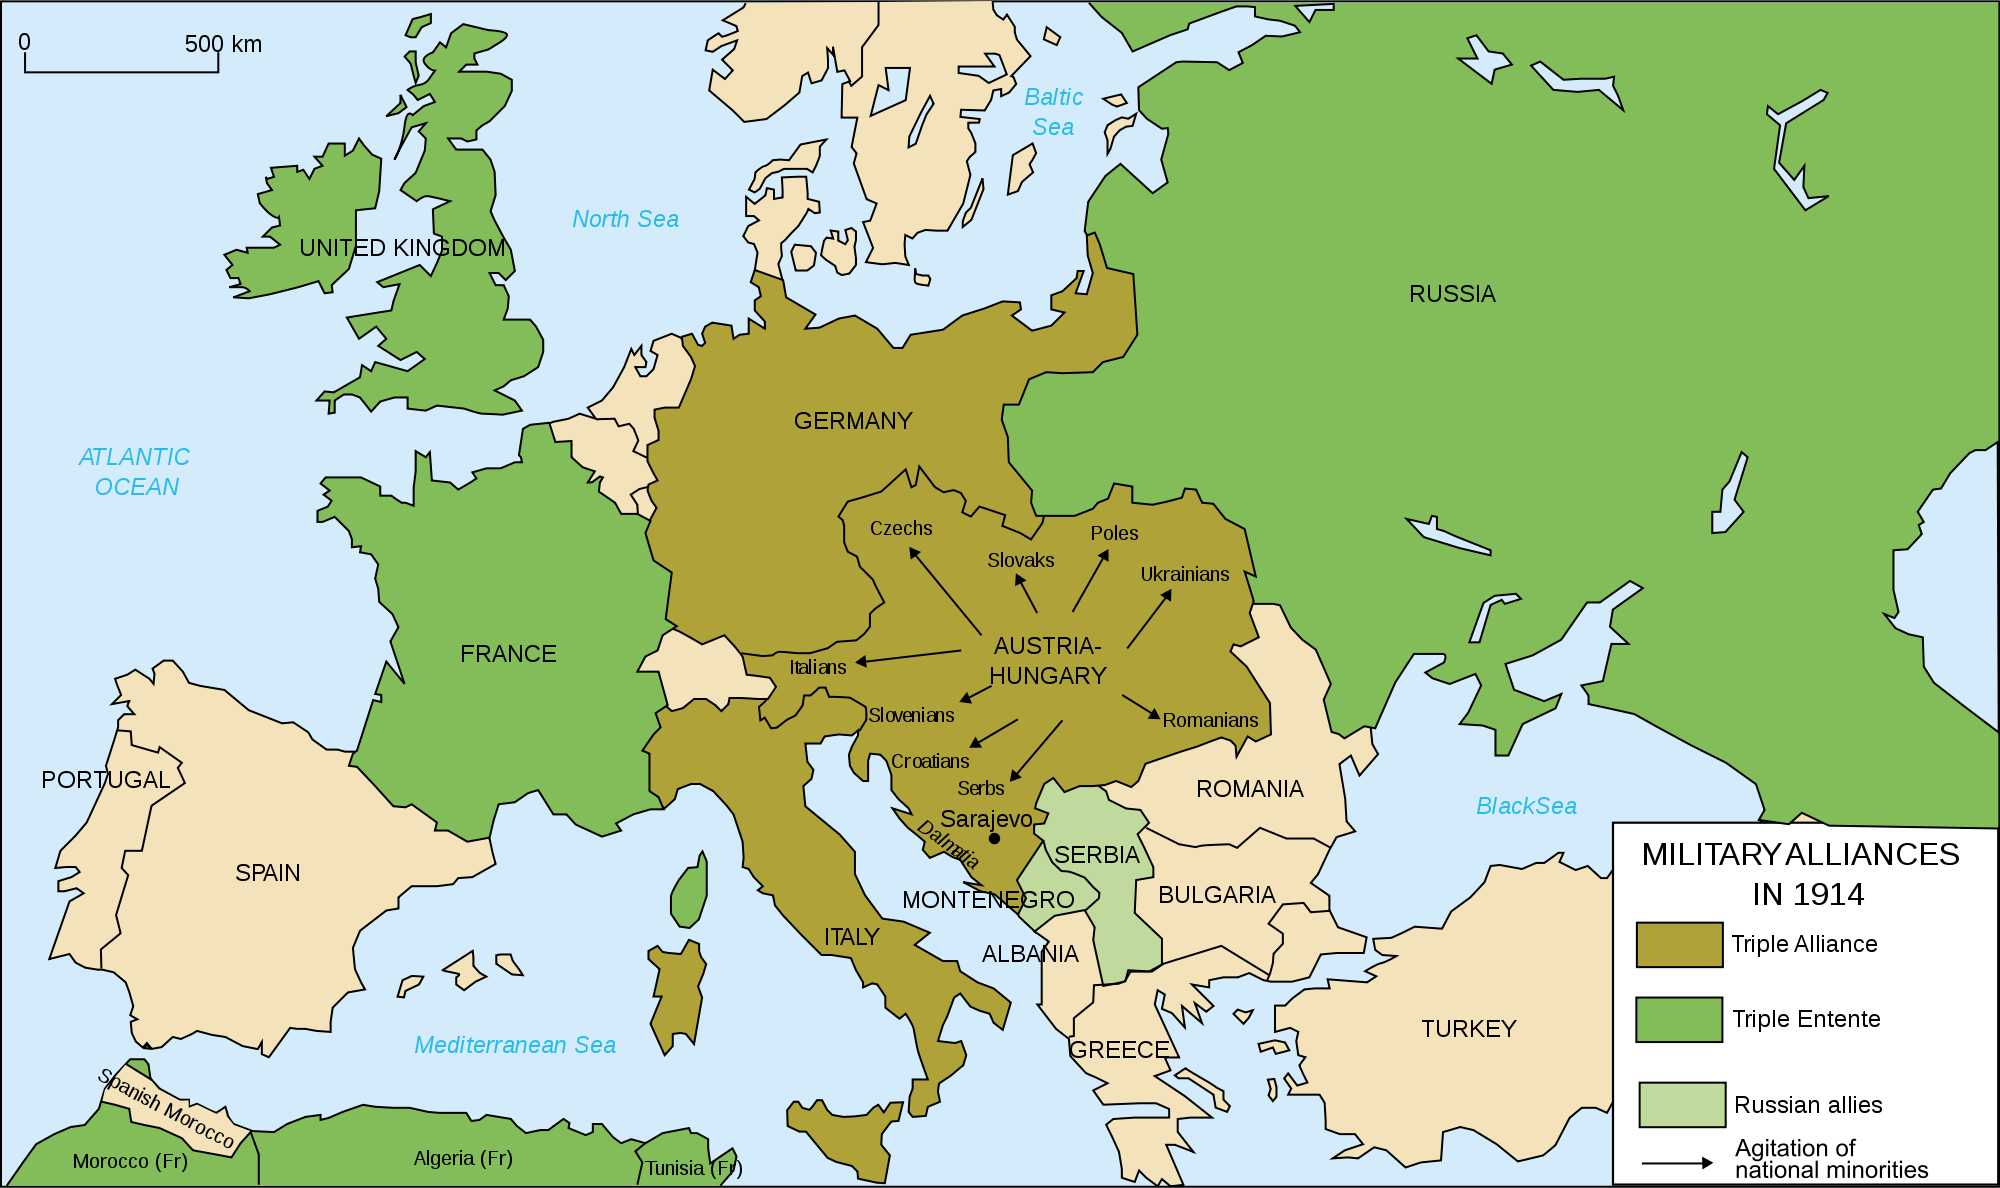 File Name : -Europes-military-alliances-in-World-War-I-1914.png ...